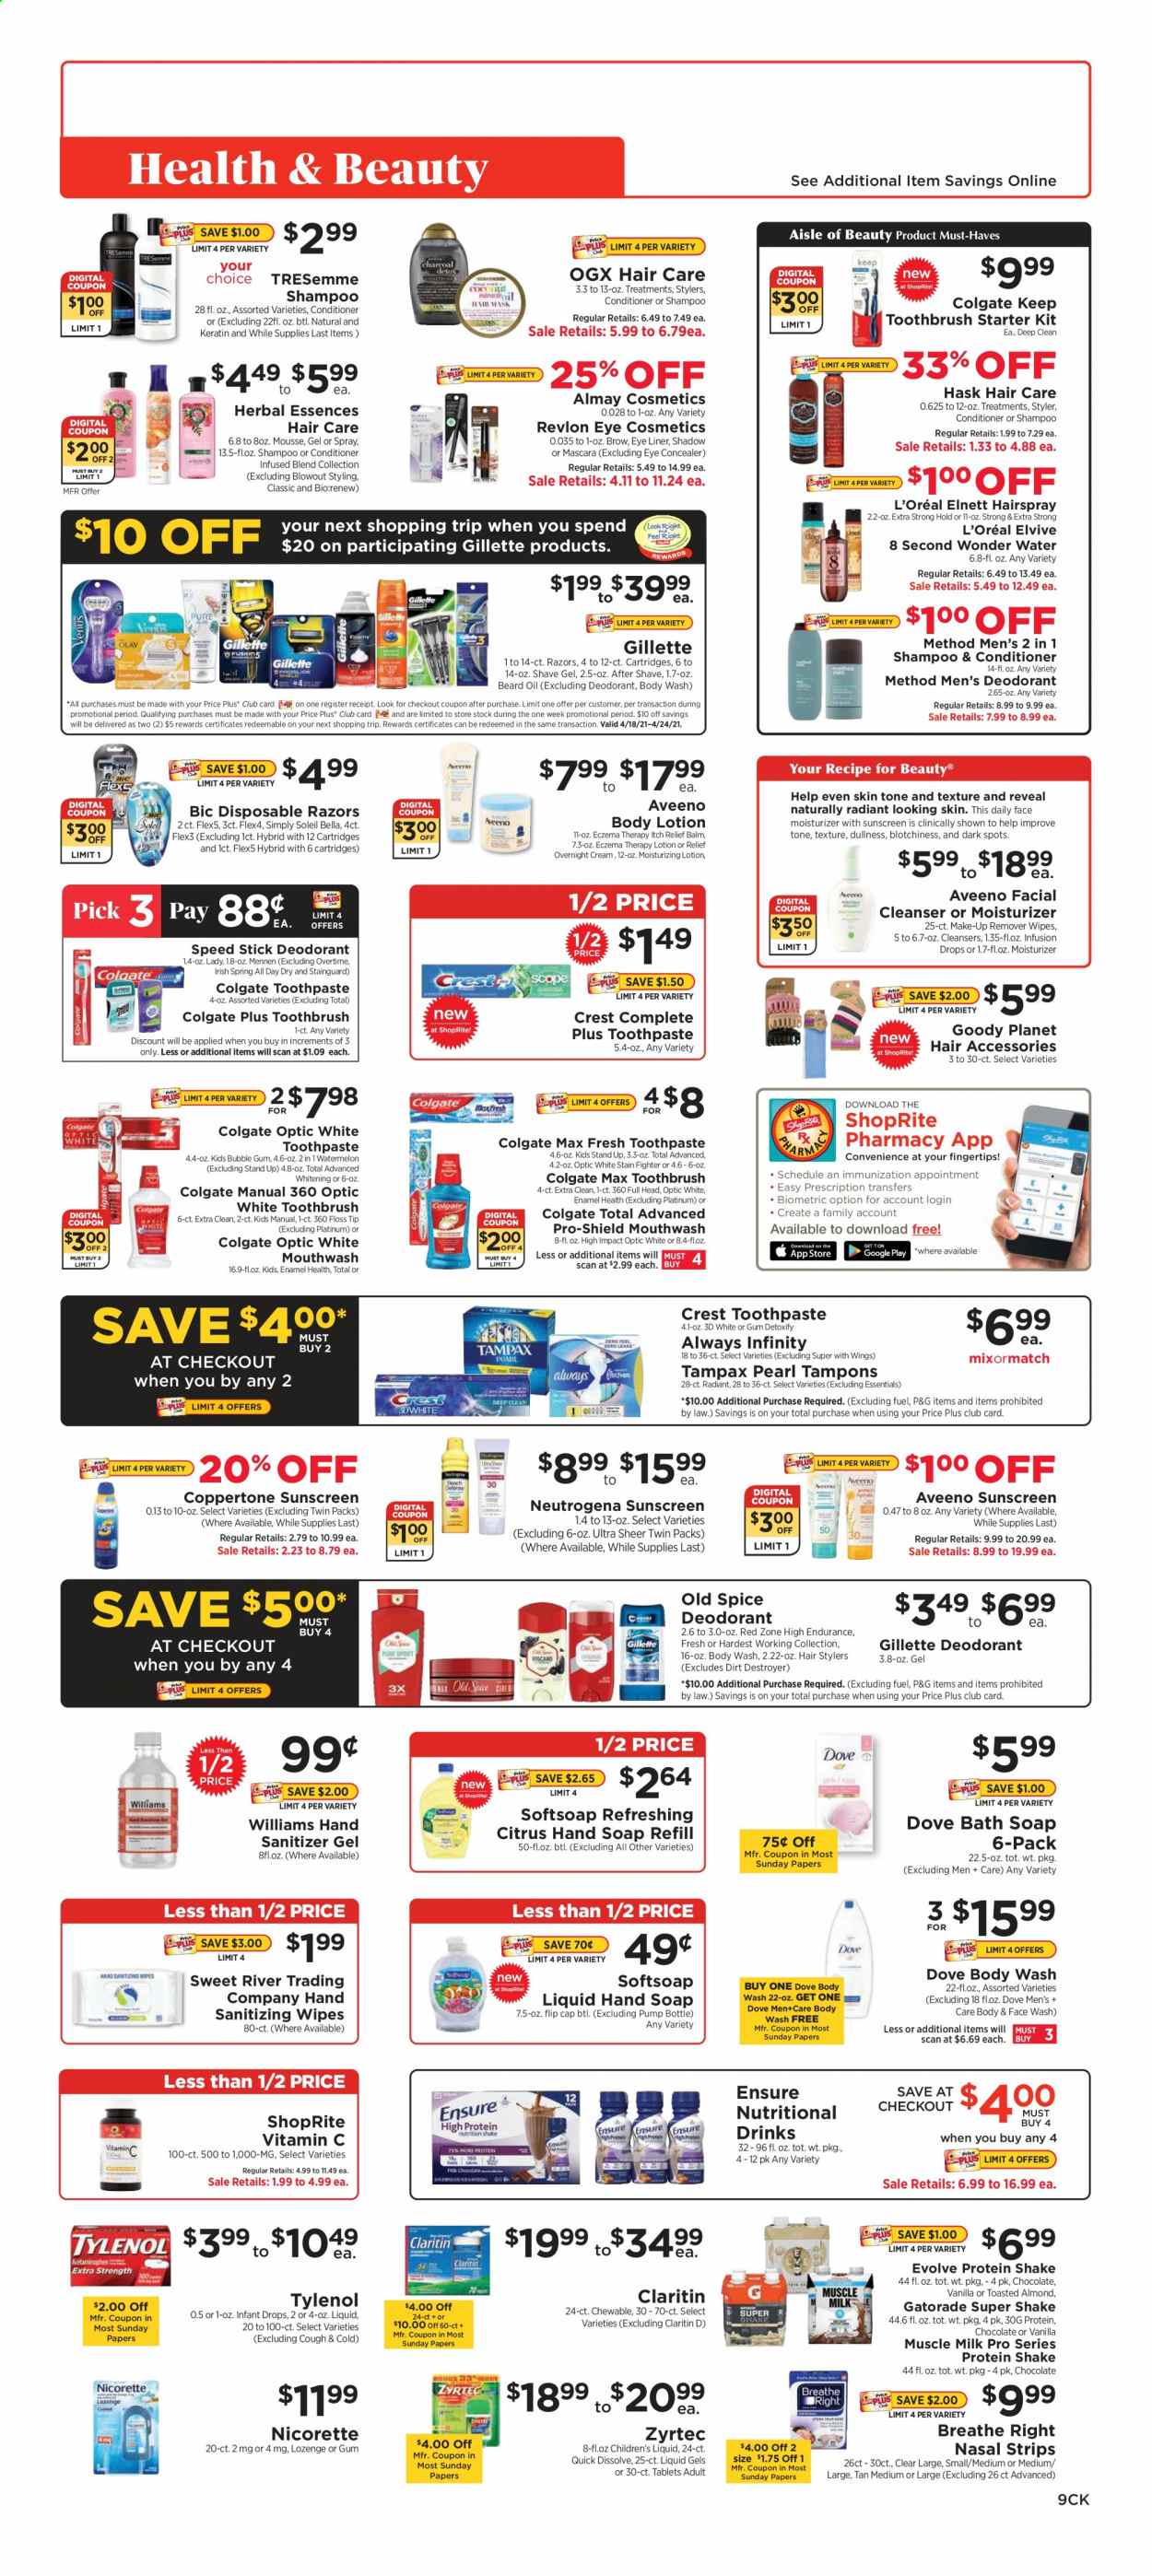 thumbnail - ShopRite Flyer - 04/18/2021 - 04/24/2021 - Sales products - watermelon, milk, protein drink, shake, muscle milk, chocolate, bubblegum, spice, oil, Gatorade, Aveeno, wipes, antiseptic wipes, body wash, Dove, shampoo, Softsoap, hand soap, Old Spice, face gel, soap, Colgate, toothbrush, toothpaste, mouthwash, Crest, Tampax, tampons, Almay, cleanser, L’Oréal, moisturizer, Neutrogena, beard oil, OGX, conditioner, Revlon, TRESemmé, Herbal Essences, keratin, Hask, body lotion, anti-perspirant, Speed Stick, deodorant, after shave, BIC, Gillette, shave gel, disposable razor, Soleil Bella, Nicorette, Tylenol, Zyrtec. Page 9.